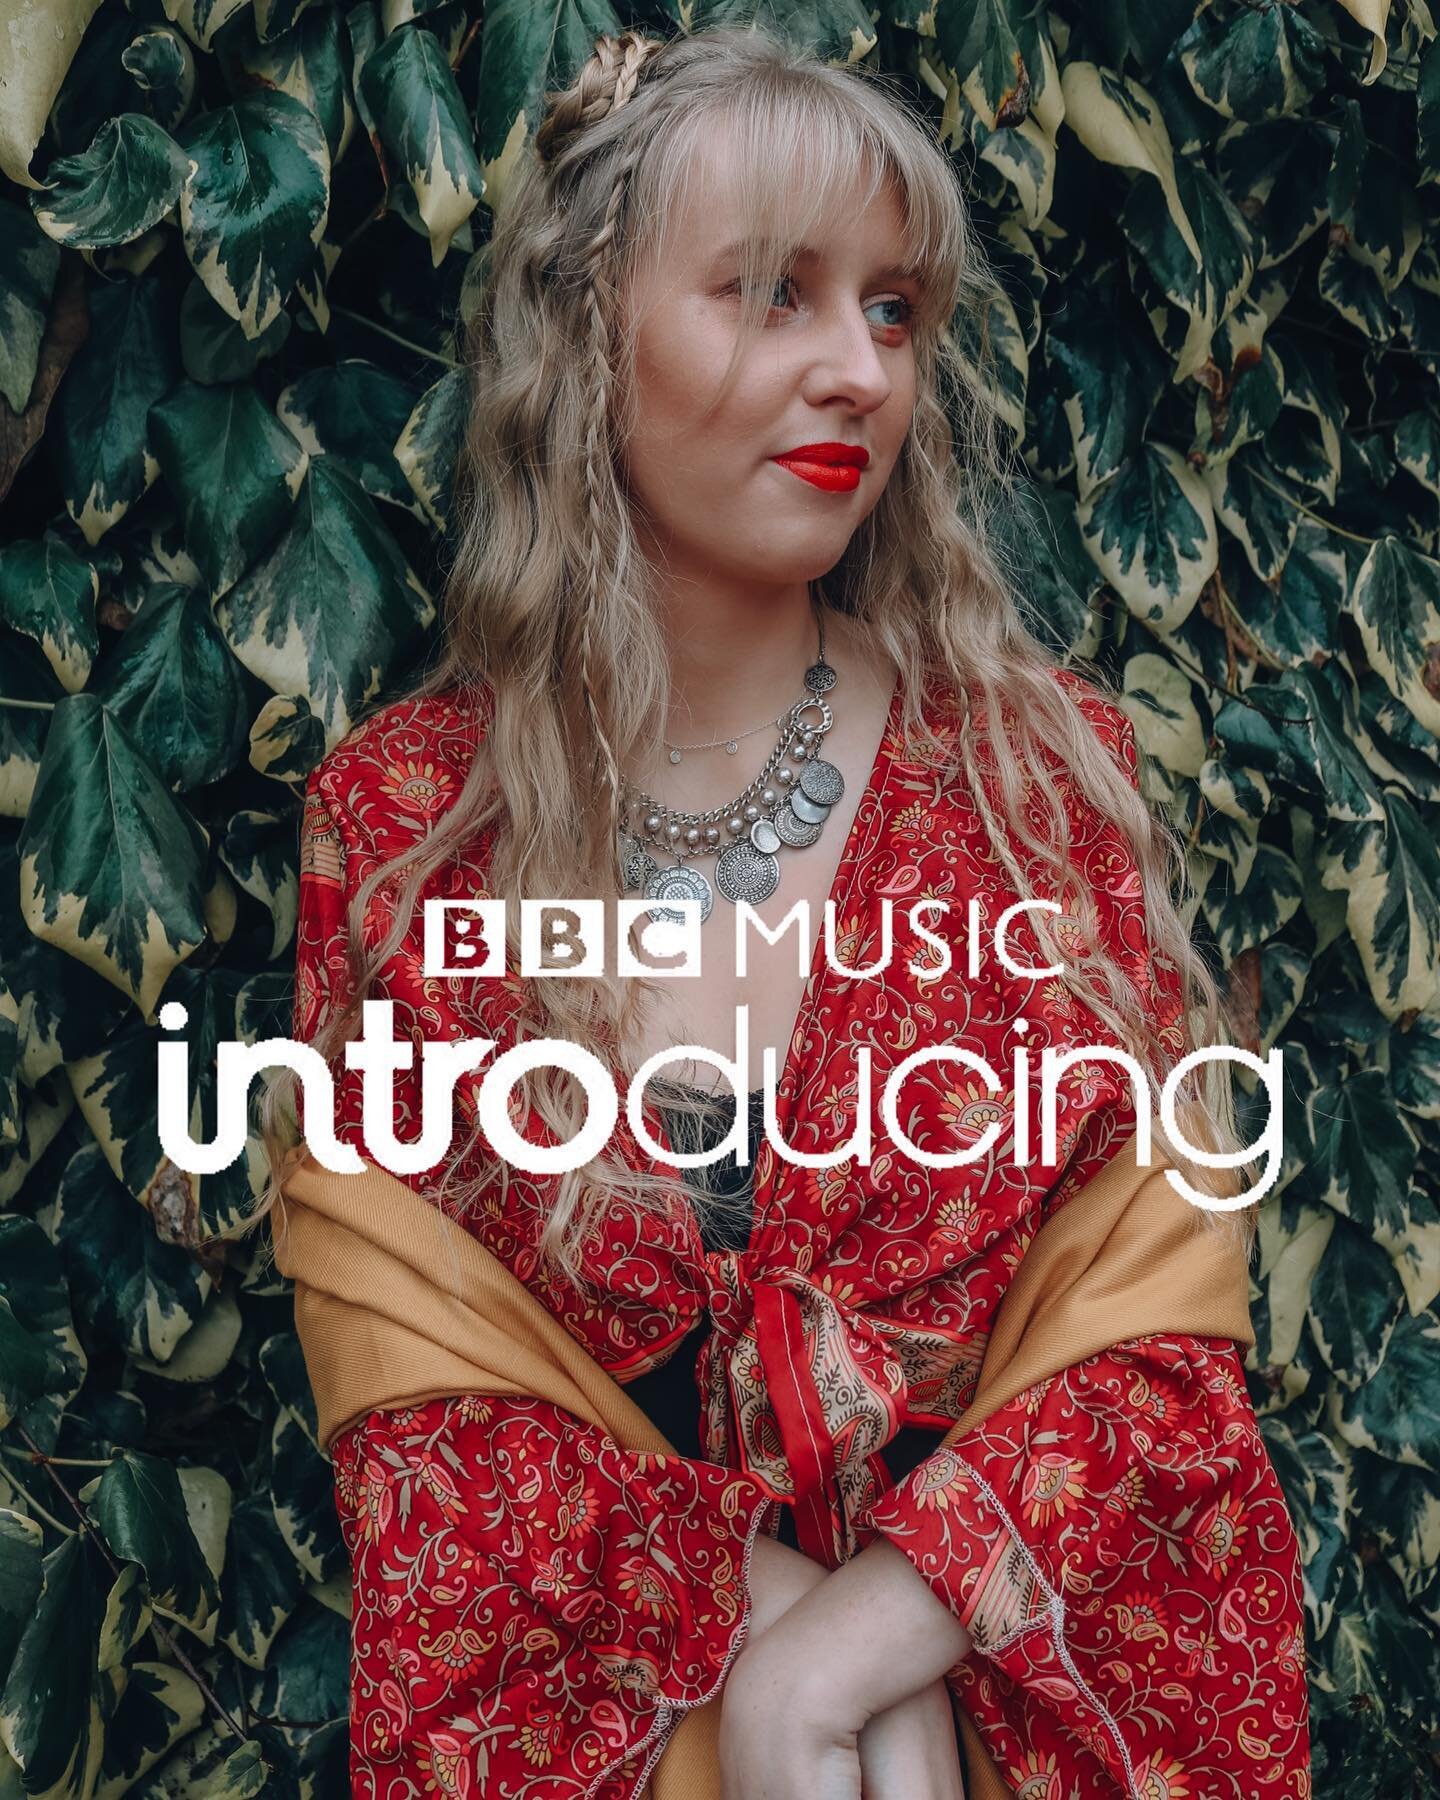 Exciting news ✨
Thanks to @robadcock at @bbcintroducingfromstoke I was chosen as one of 40 artists across the UK to collaborate on a very special project during lockdown. We each had to write and record a section of a song whilst having no idea what 